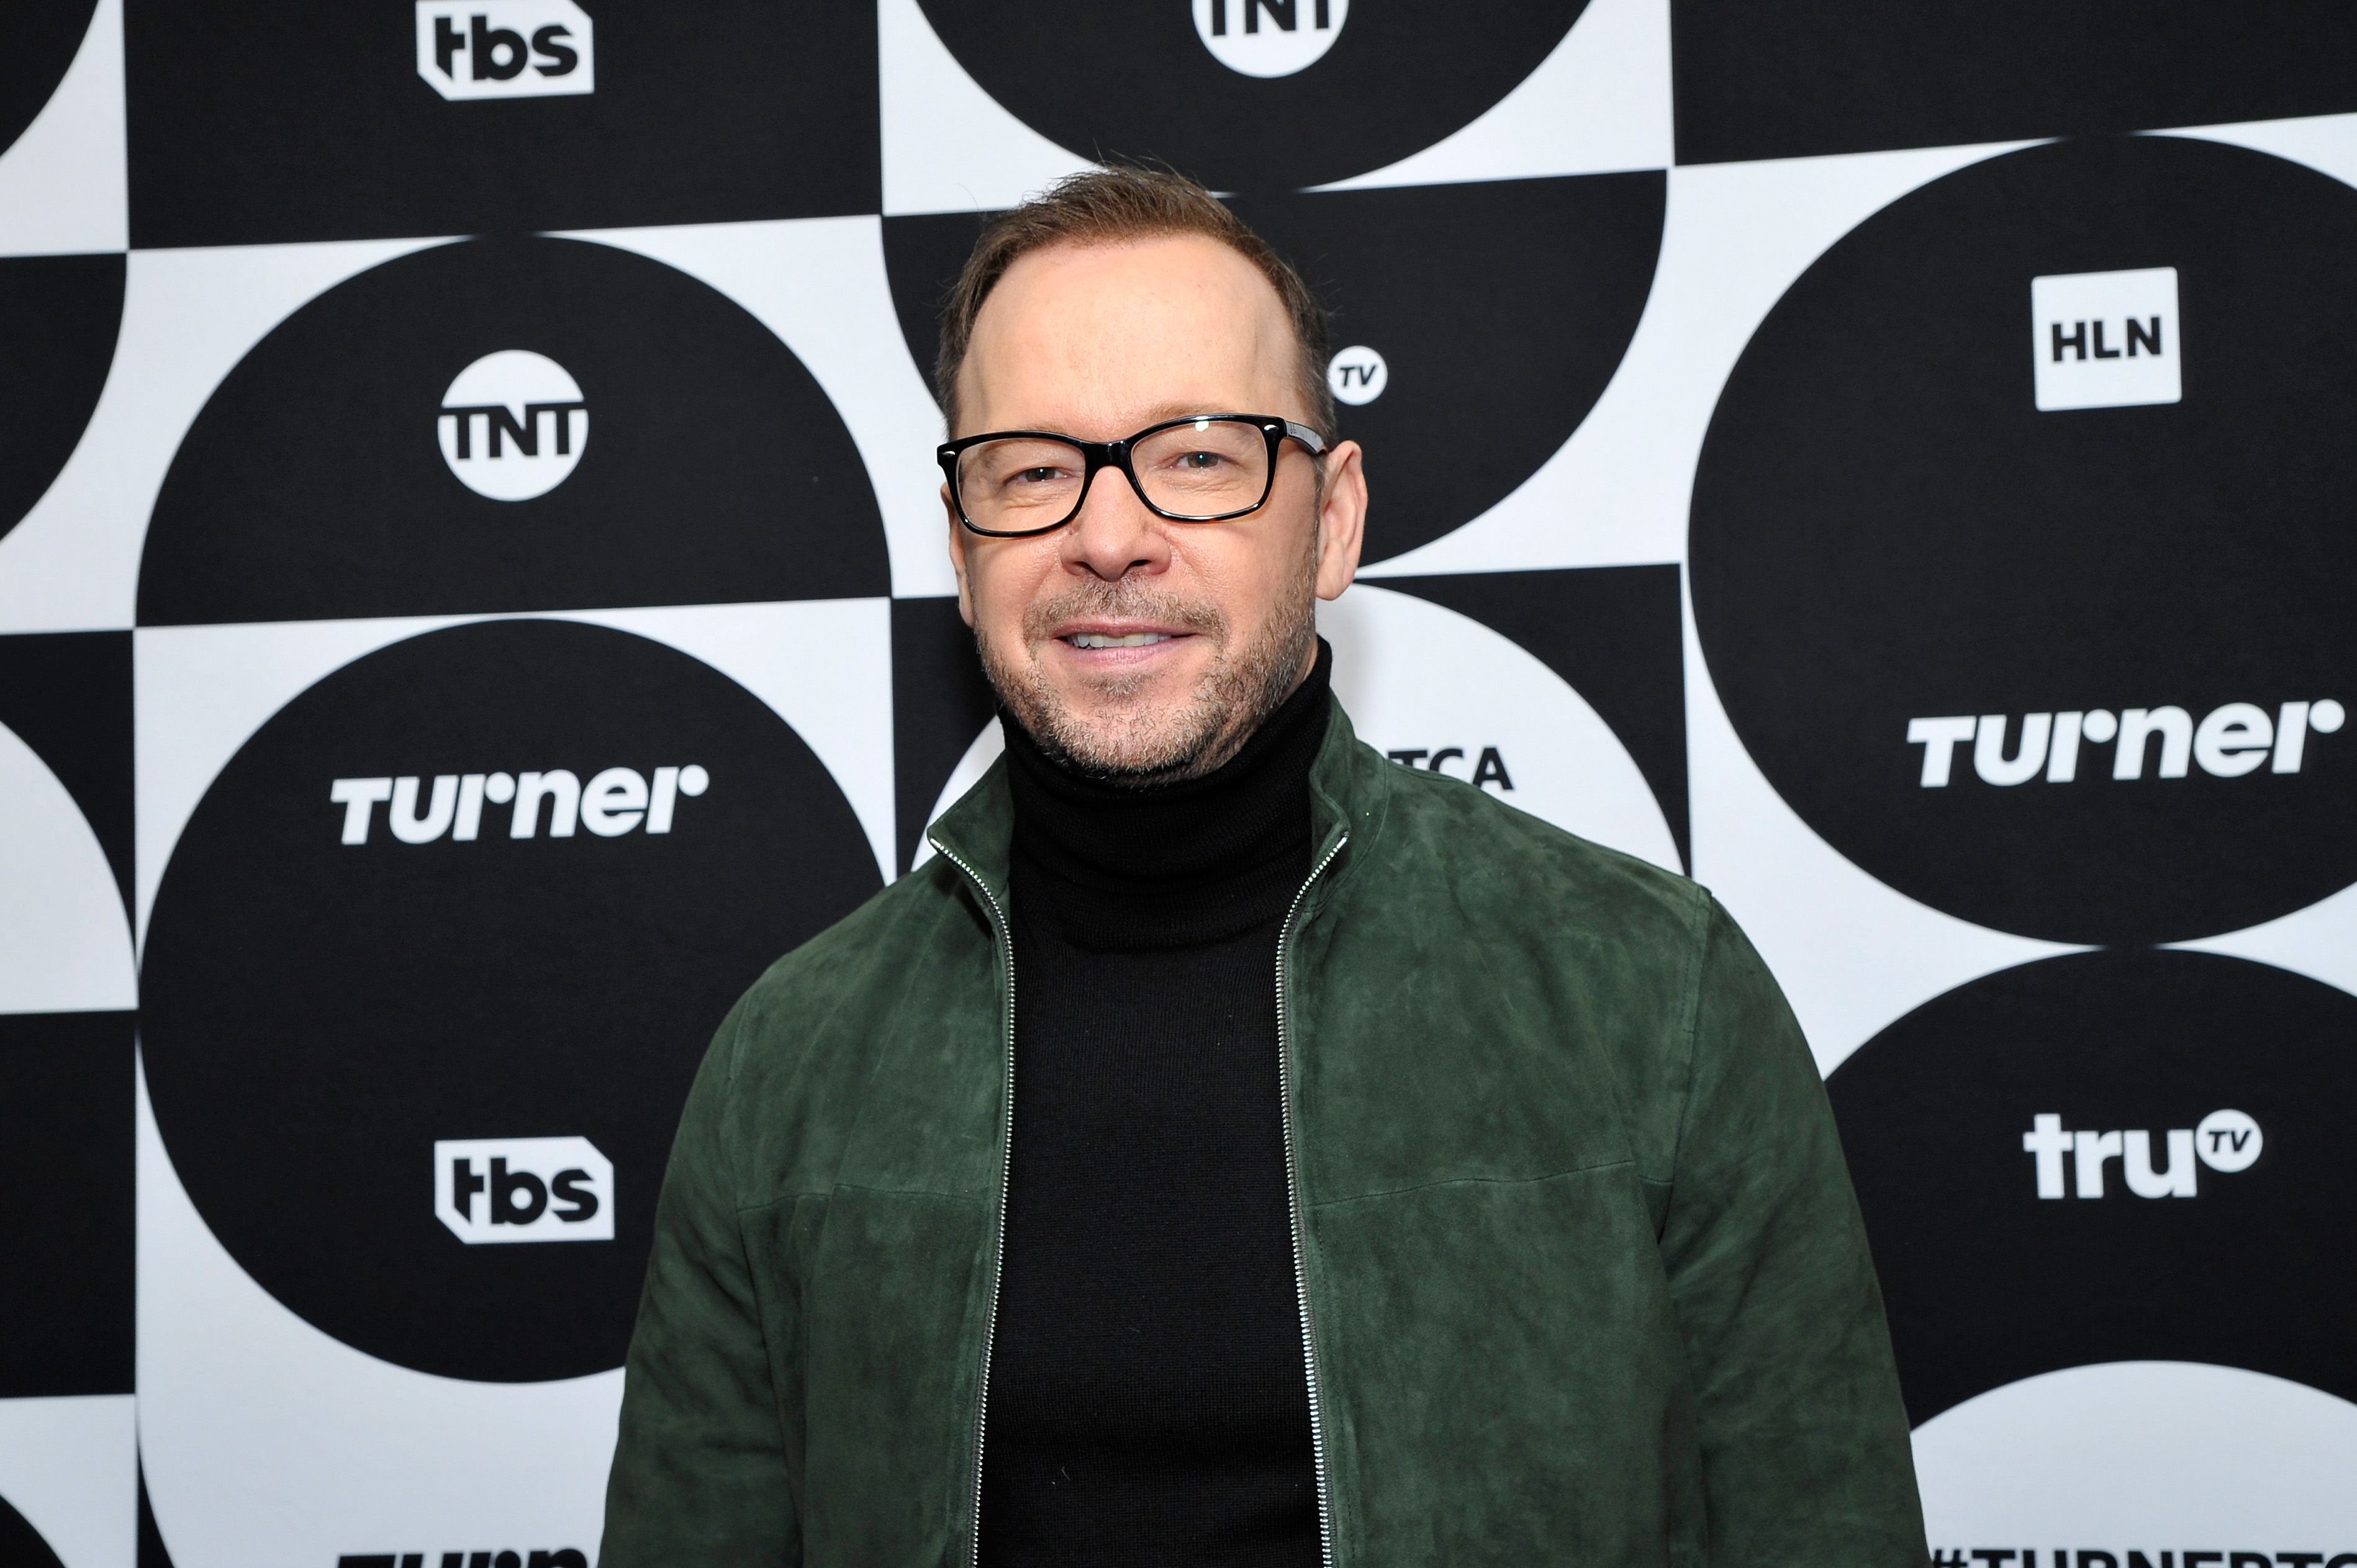 Donnie Wahlberg at the TCA Turner Winter Press Tour 2019 at The Langham Huntington Hotel and Spa on February 11, 2019 | Photo: Getty Images